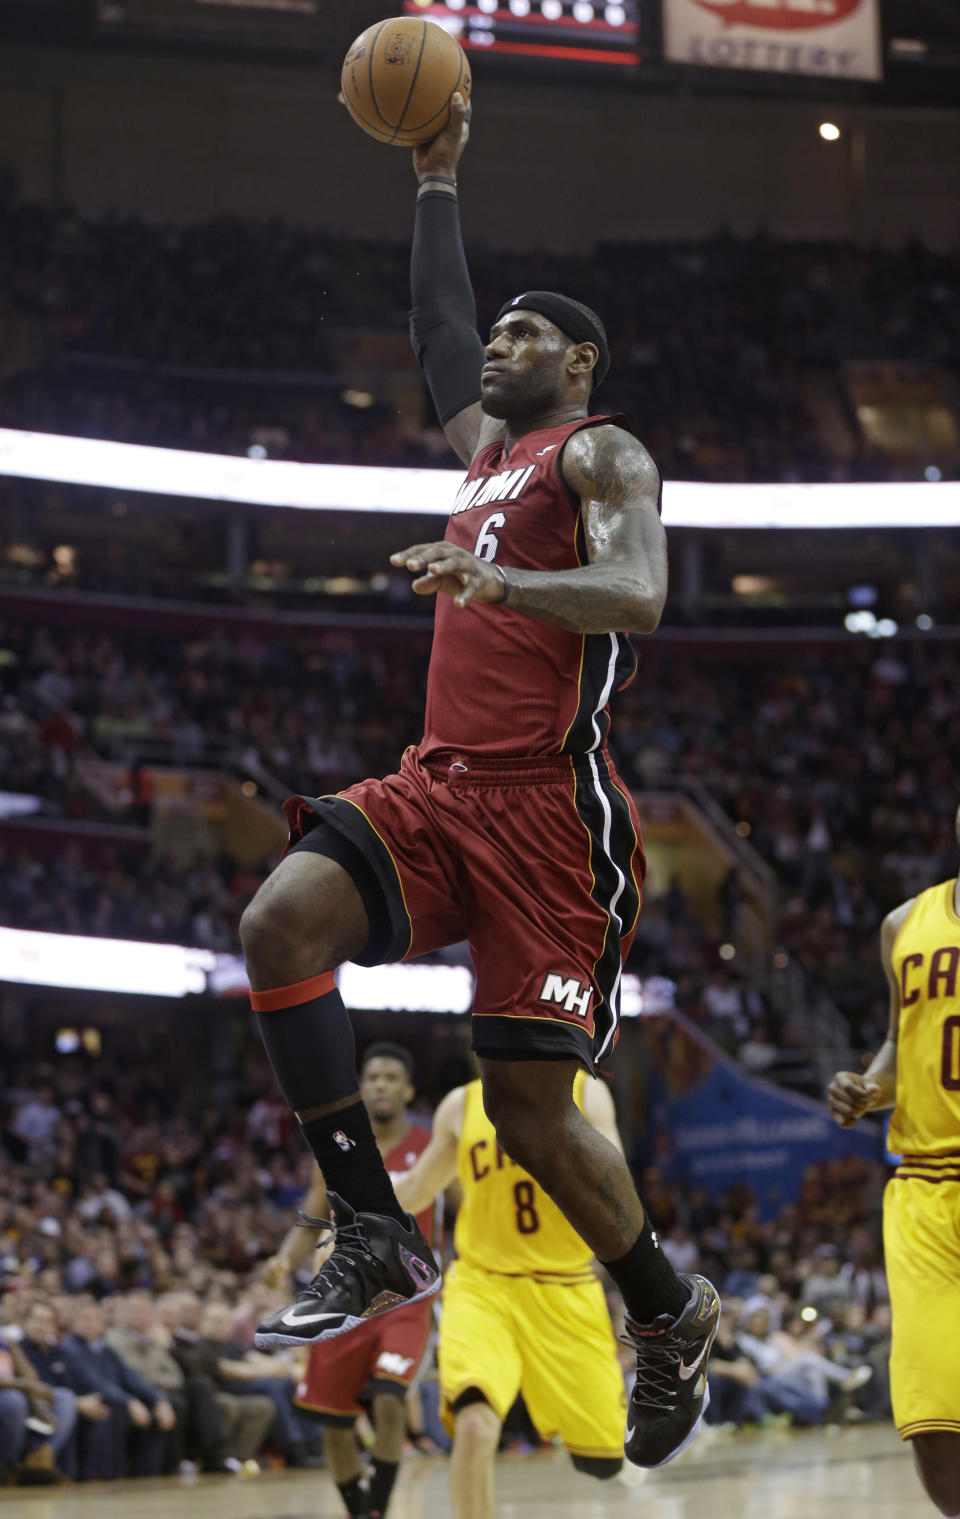 Miami Heat's LeBron James (6) jumps to the basket against the Cleveland Cavaliers during the first quarter of an NBA basketball game Tuesday, March 18, 2014, in Cleveland. (AP Photo/Tony Dejak)